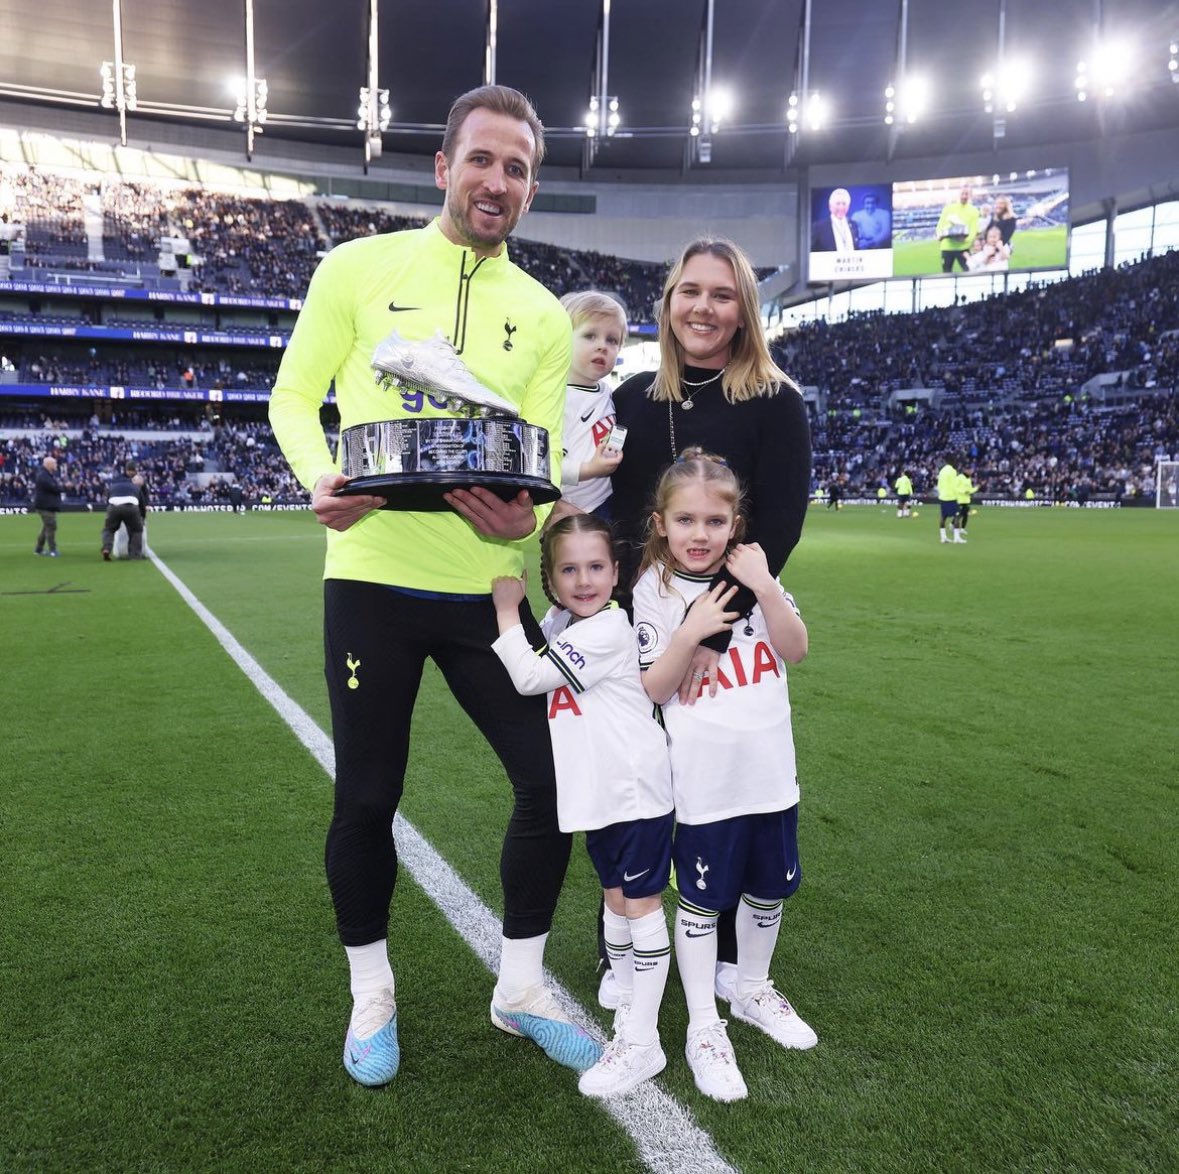 Harry Kane message to Spurs fans: “The season didn’t go how we wanted, but I can only thank Tottenham fans for their relentless support all year”. ⚪️ #THFC

“Becoming club’s all time leading goal scorer fills me with incredible pride”.